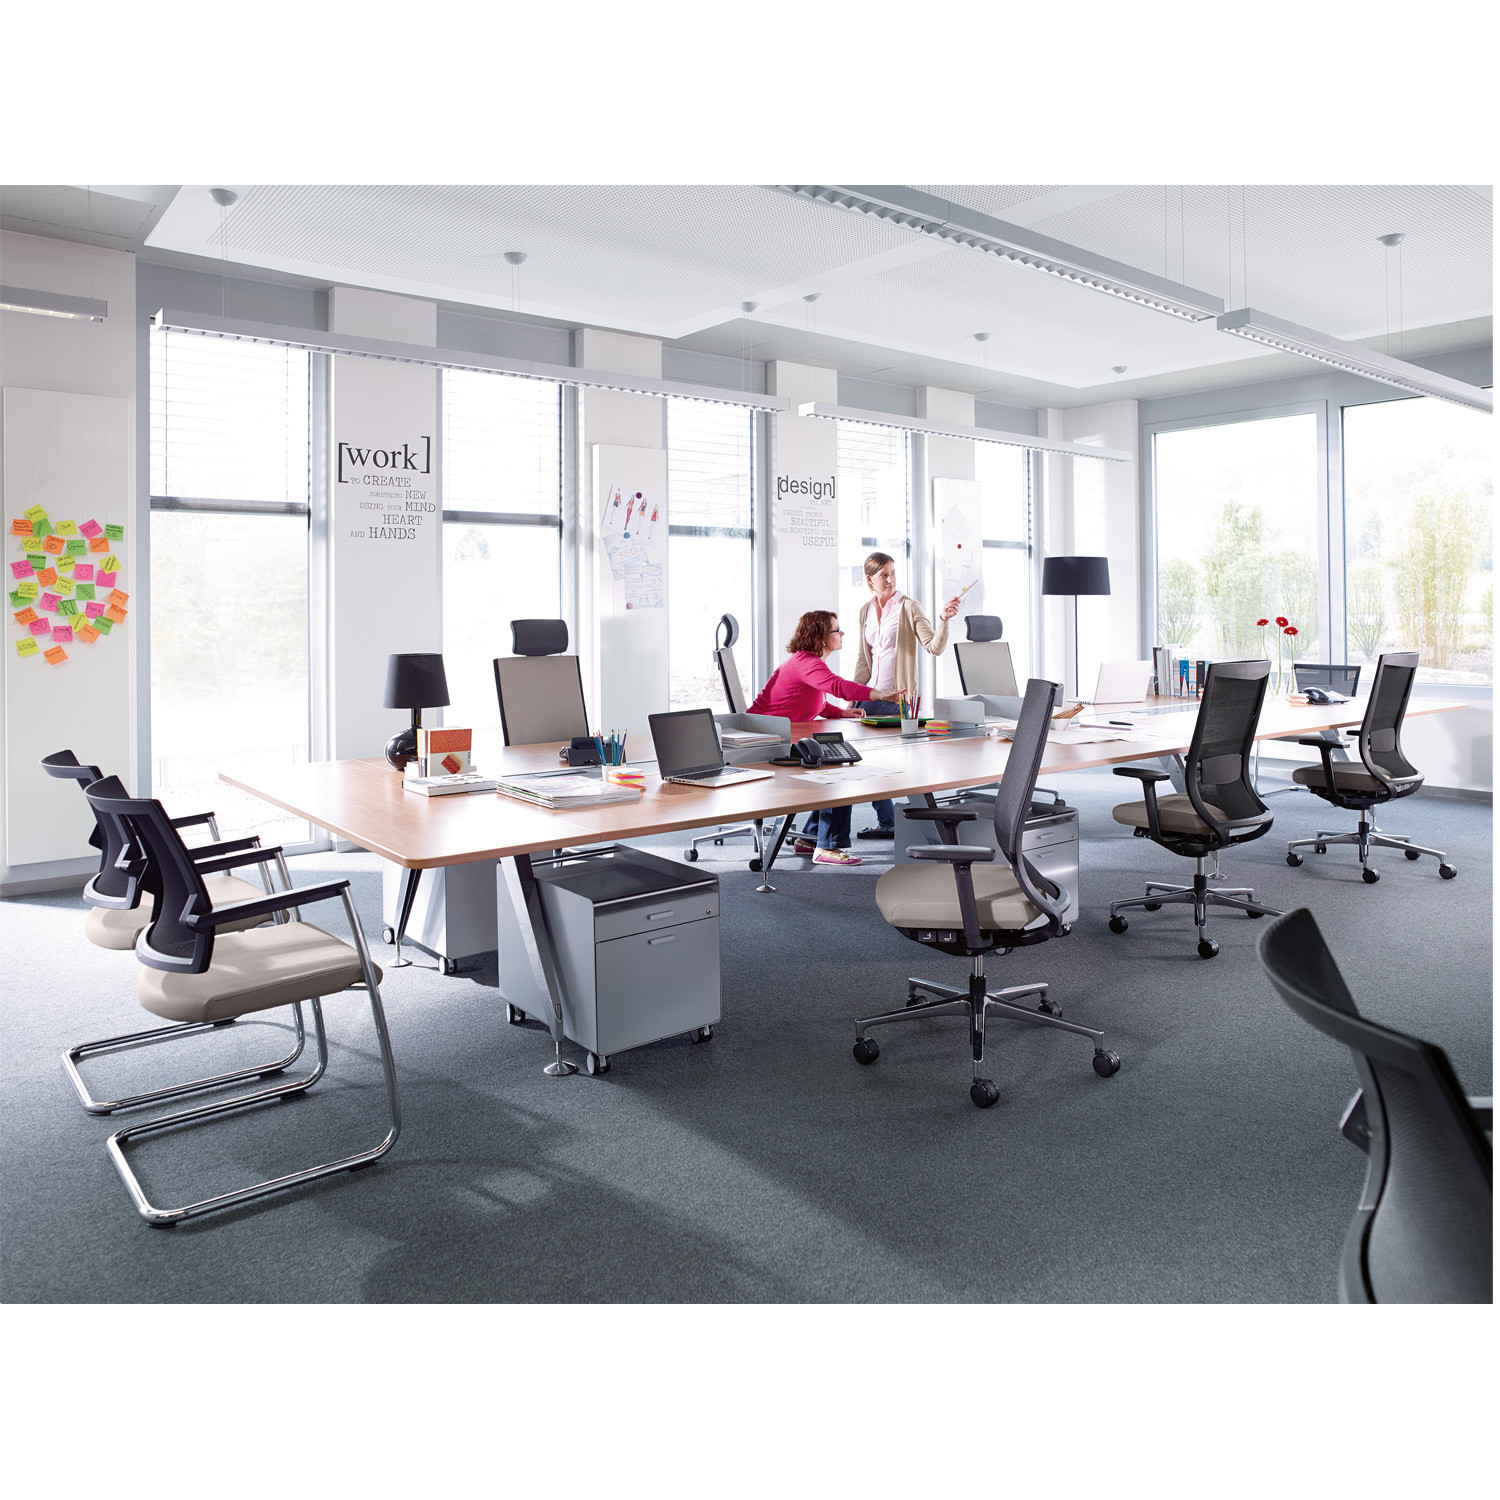 Duera's Office Task Chairs by Klober